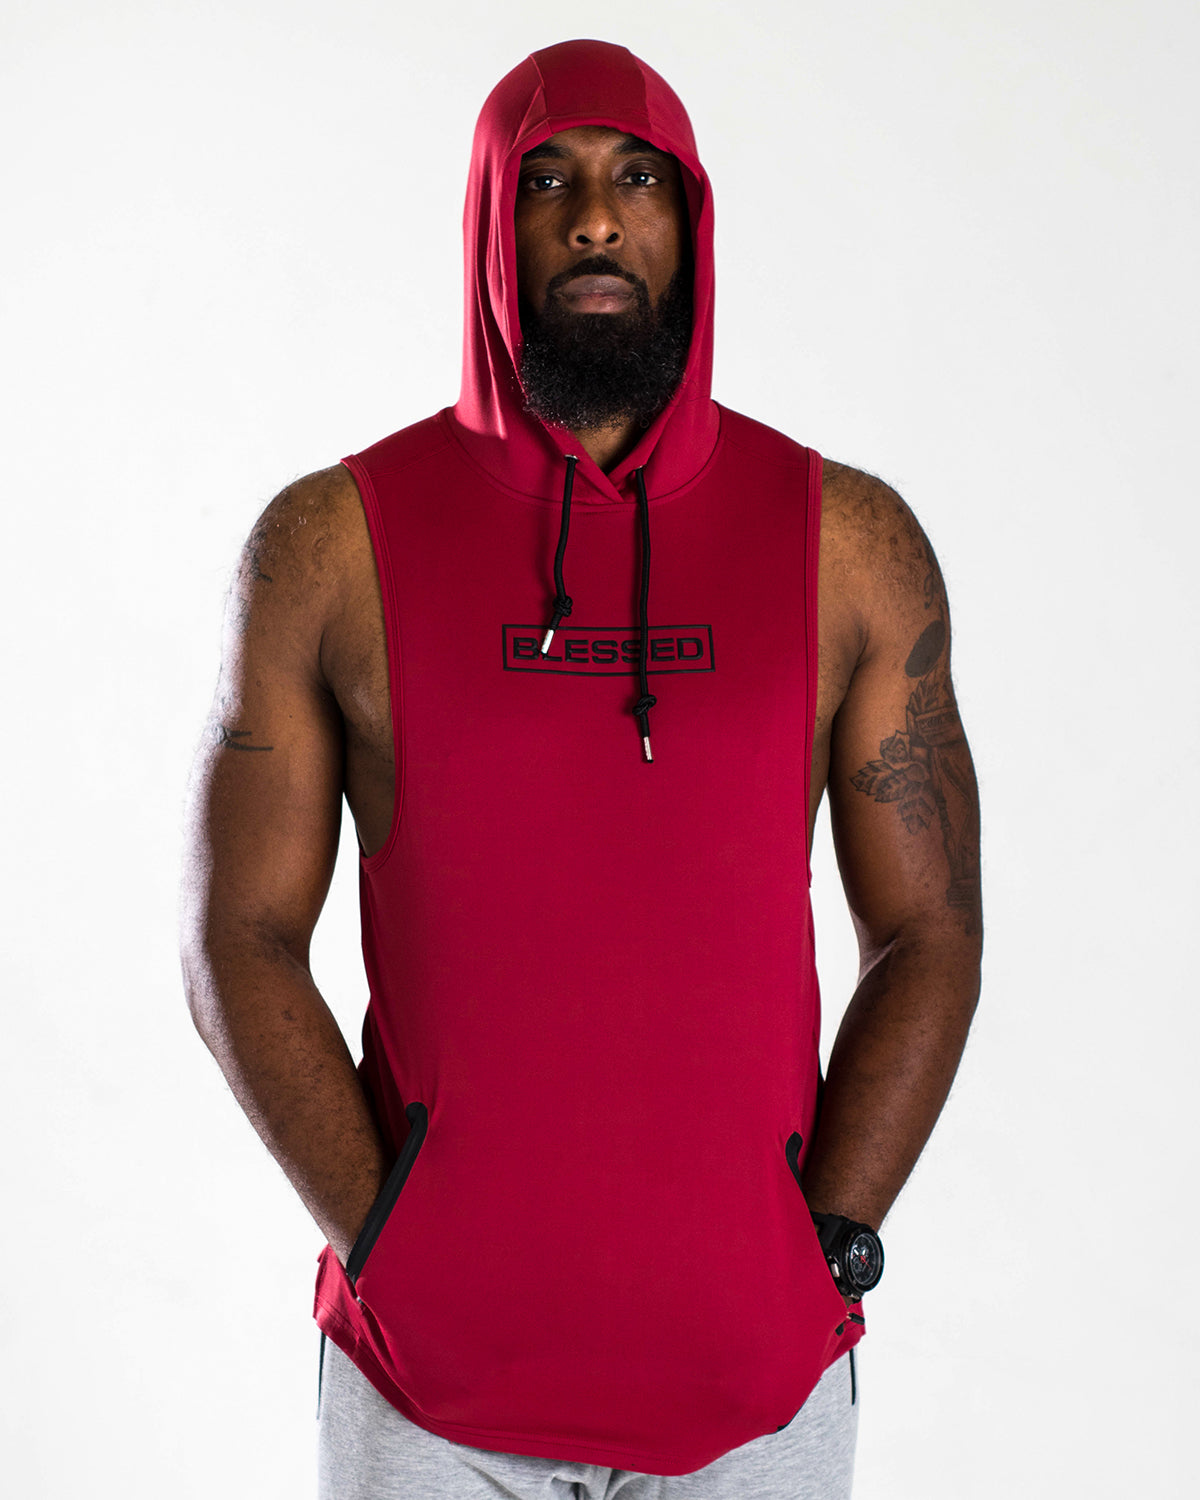 Men's Blessed Performance Tech Sleeveless Hoodie in Red Color